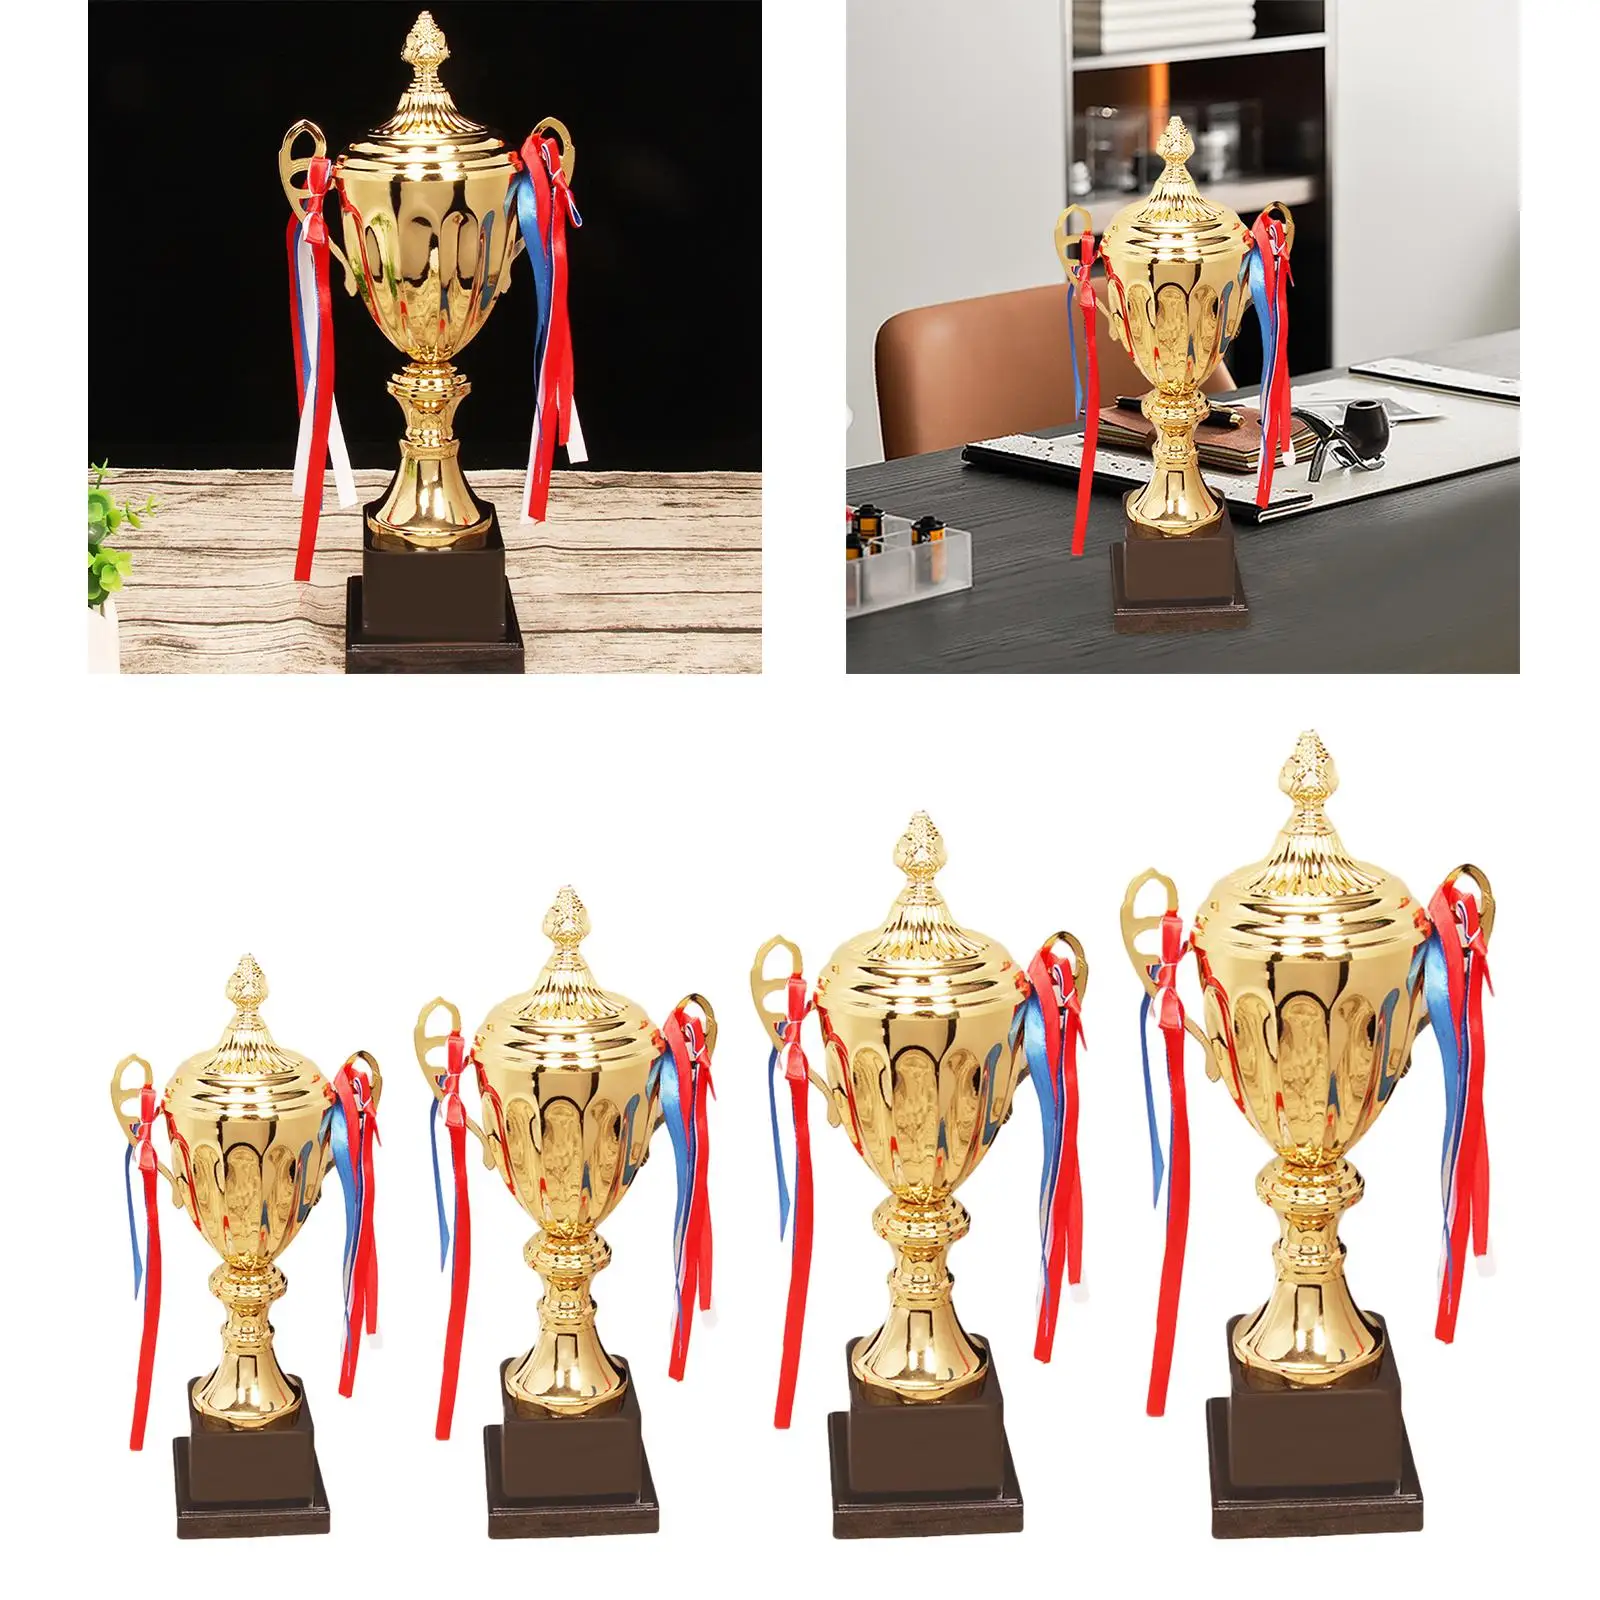 Large Award Trophies Children Props Trophy Cup Award Games Prize Winning Trophy for Football Sports Baseball Tournaments Soccer